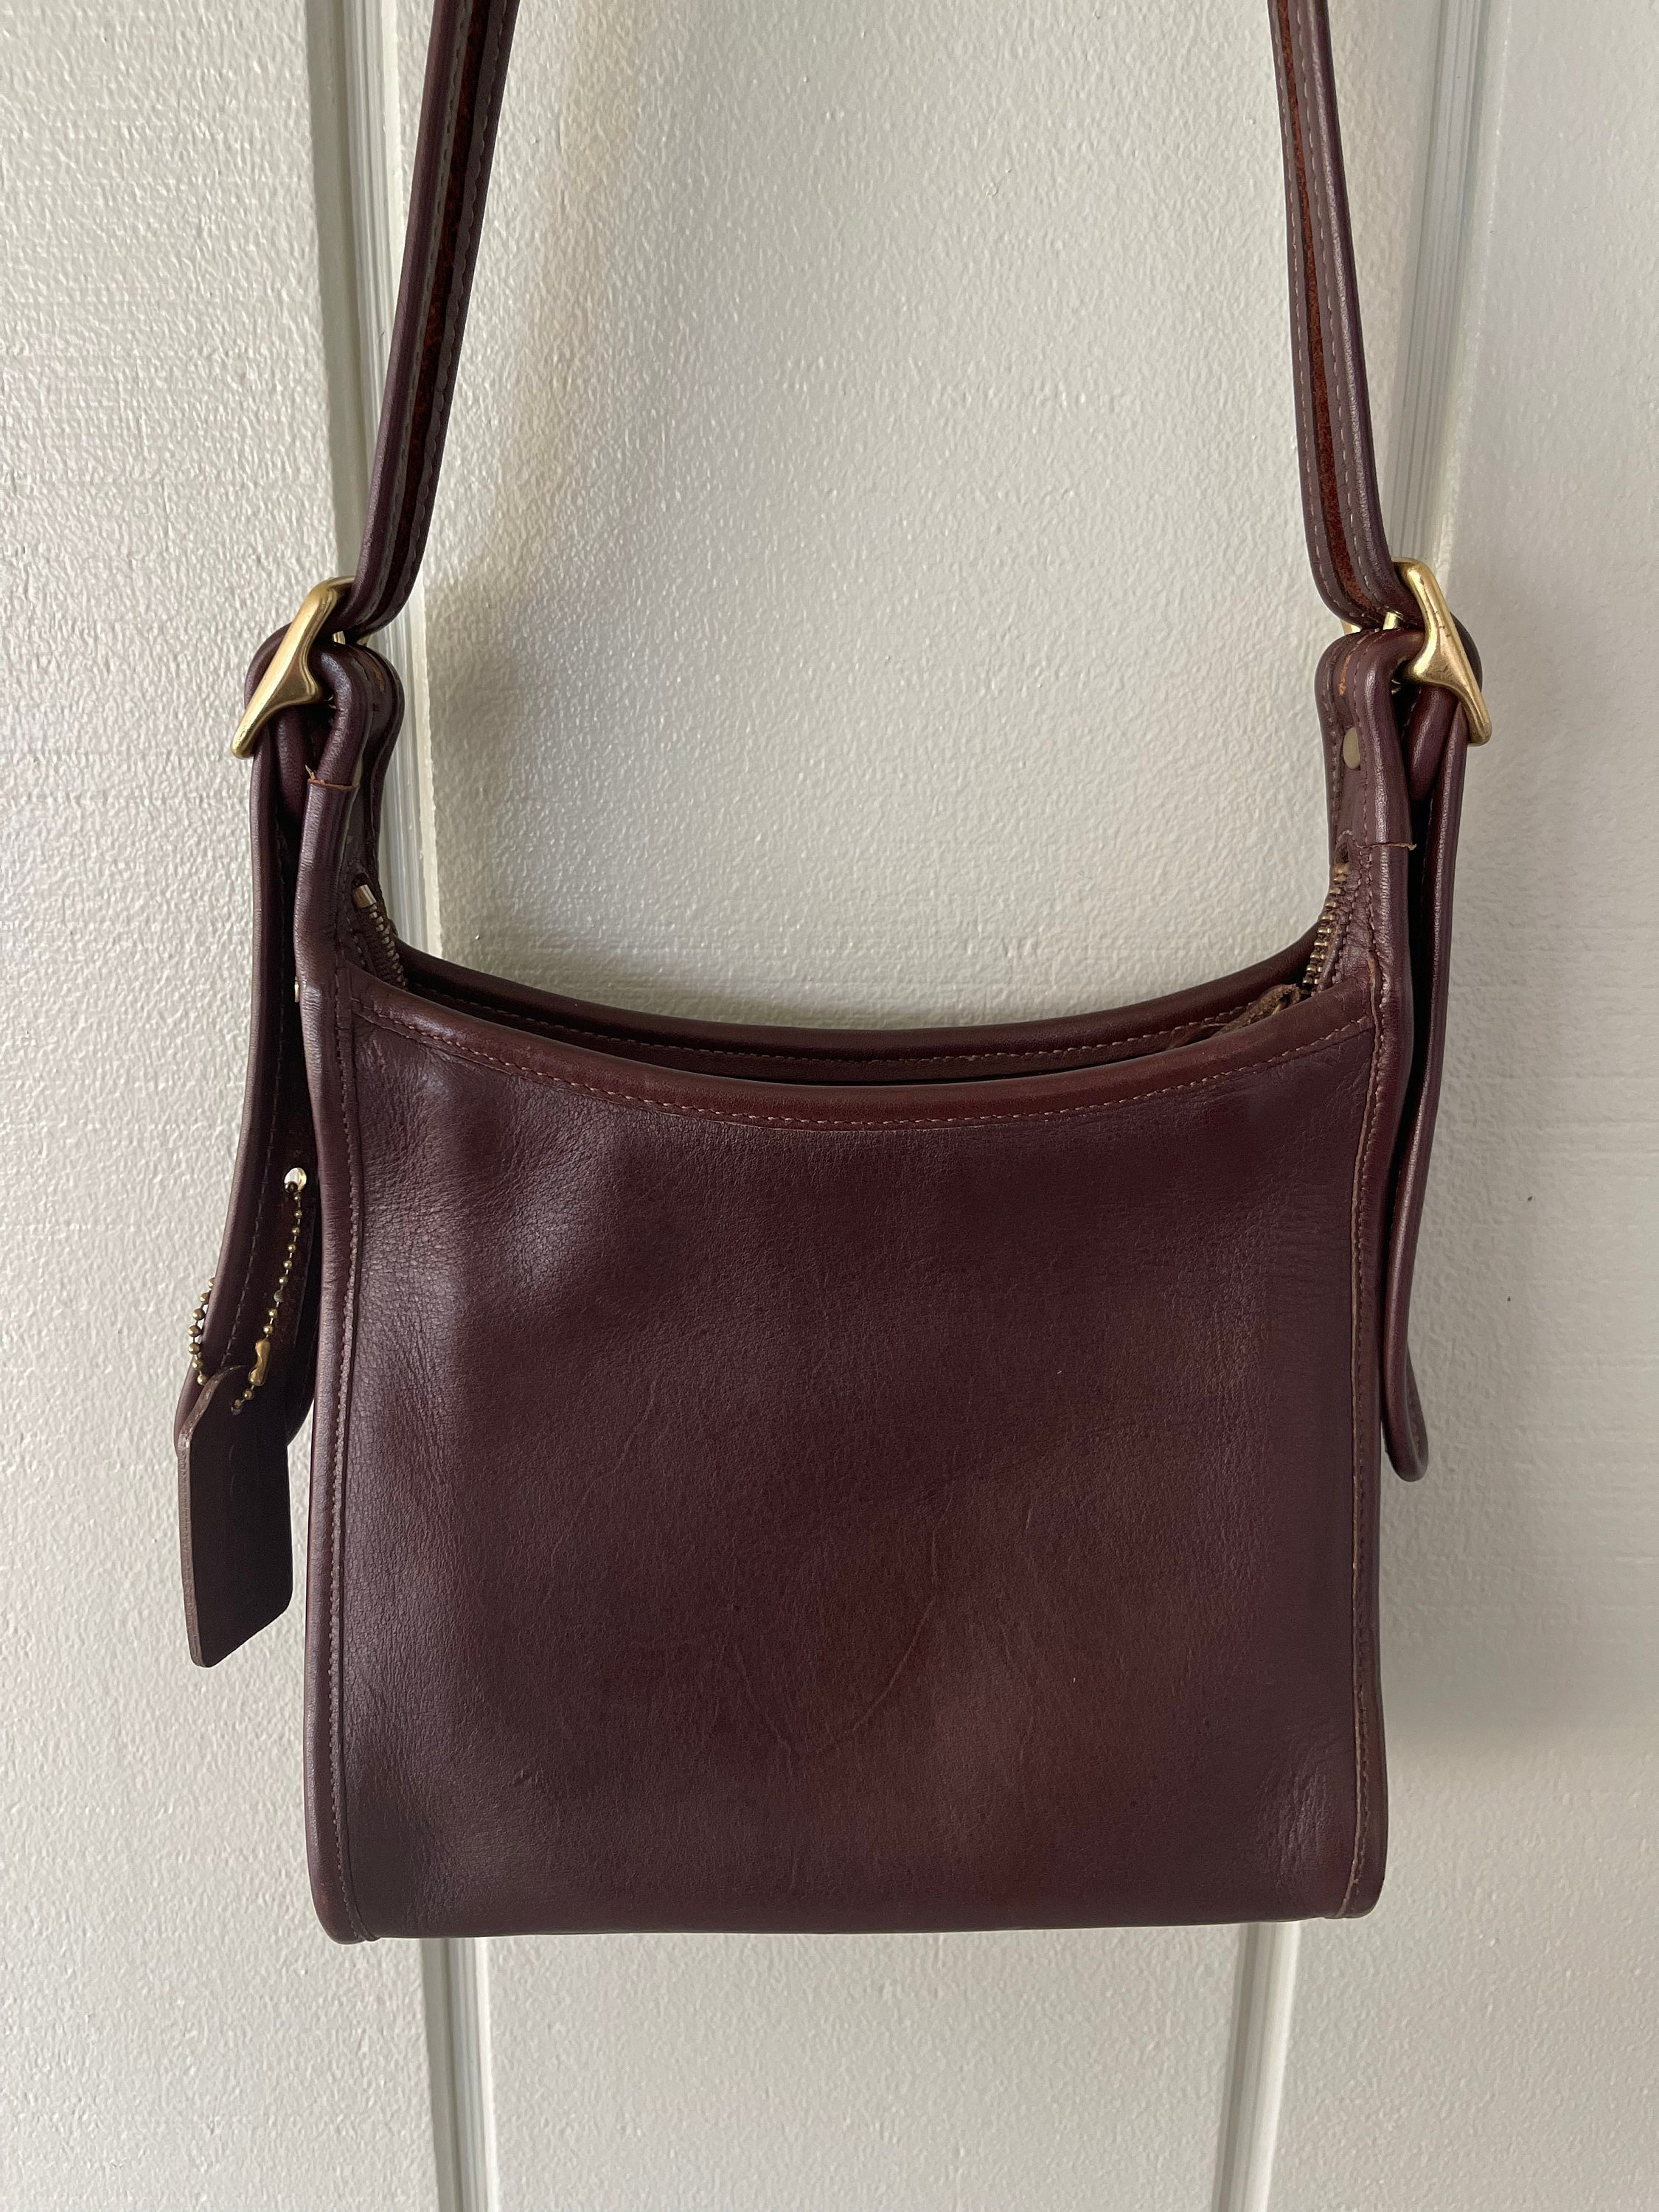 Coach Small Brown Leather Shoulder Bag - Etsy Israel